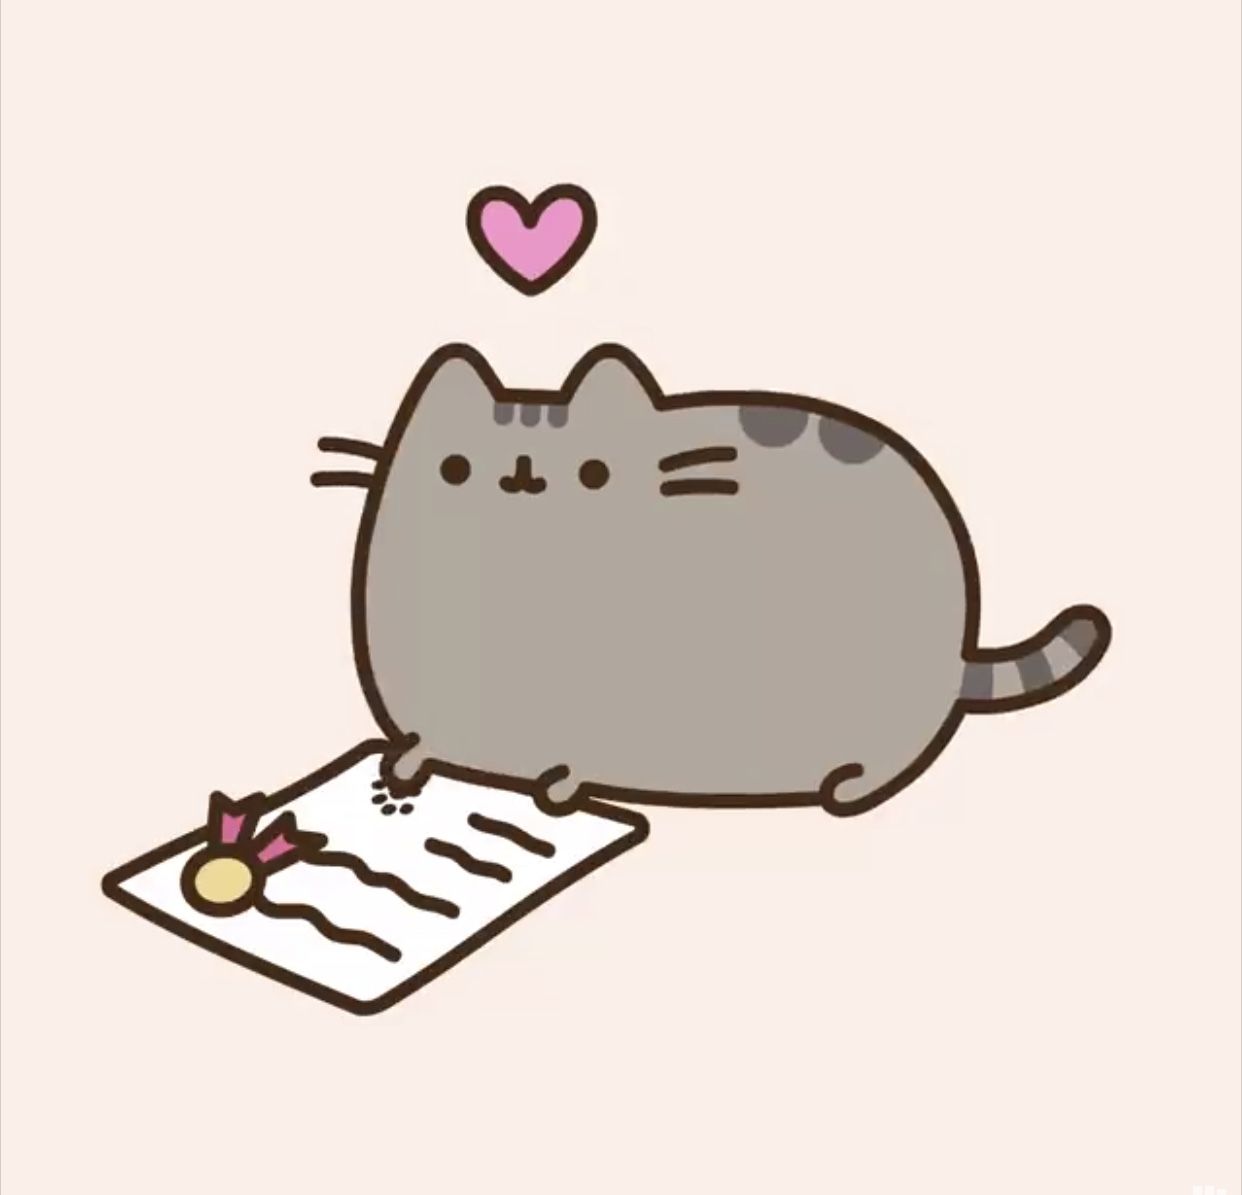 I've seen this thing everywhere on Quotev... Pusheen